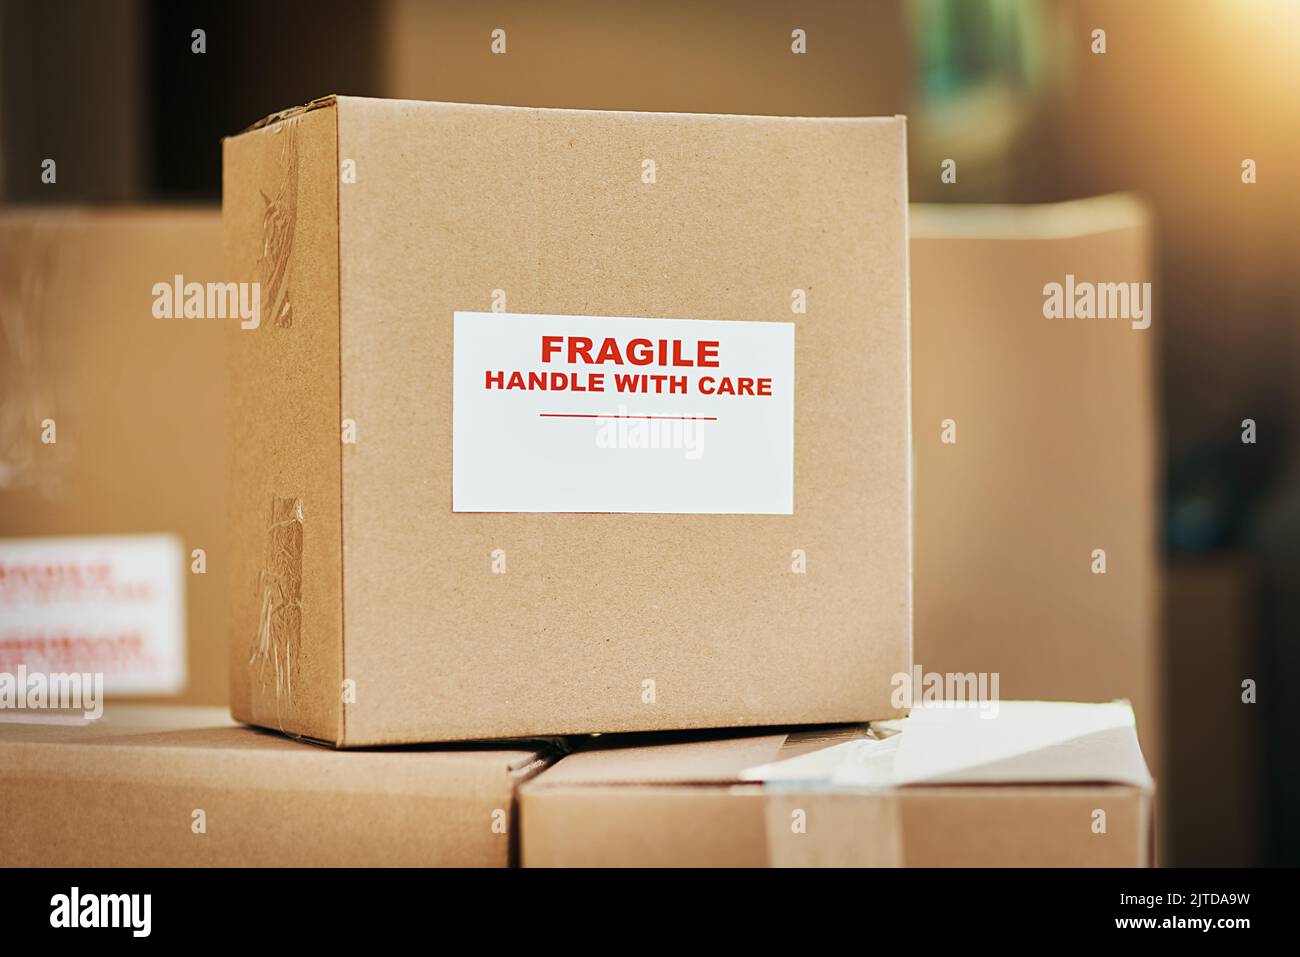 Fragile contents inside. Still life shot of cardboard boxes marked as fragile and ready for delivery. Stock Photo